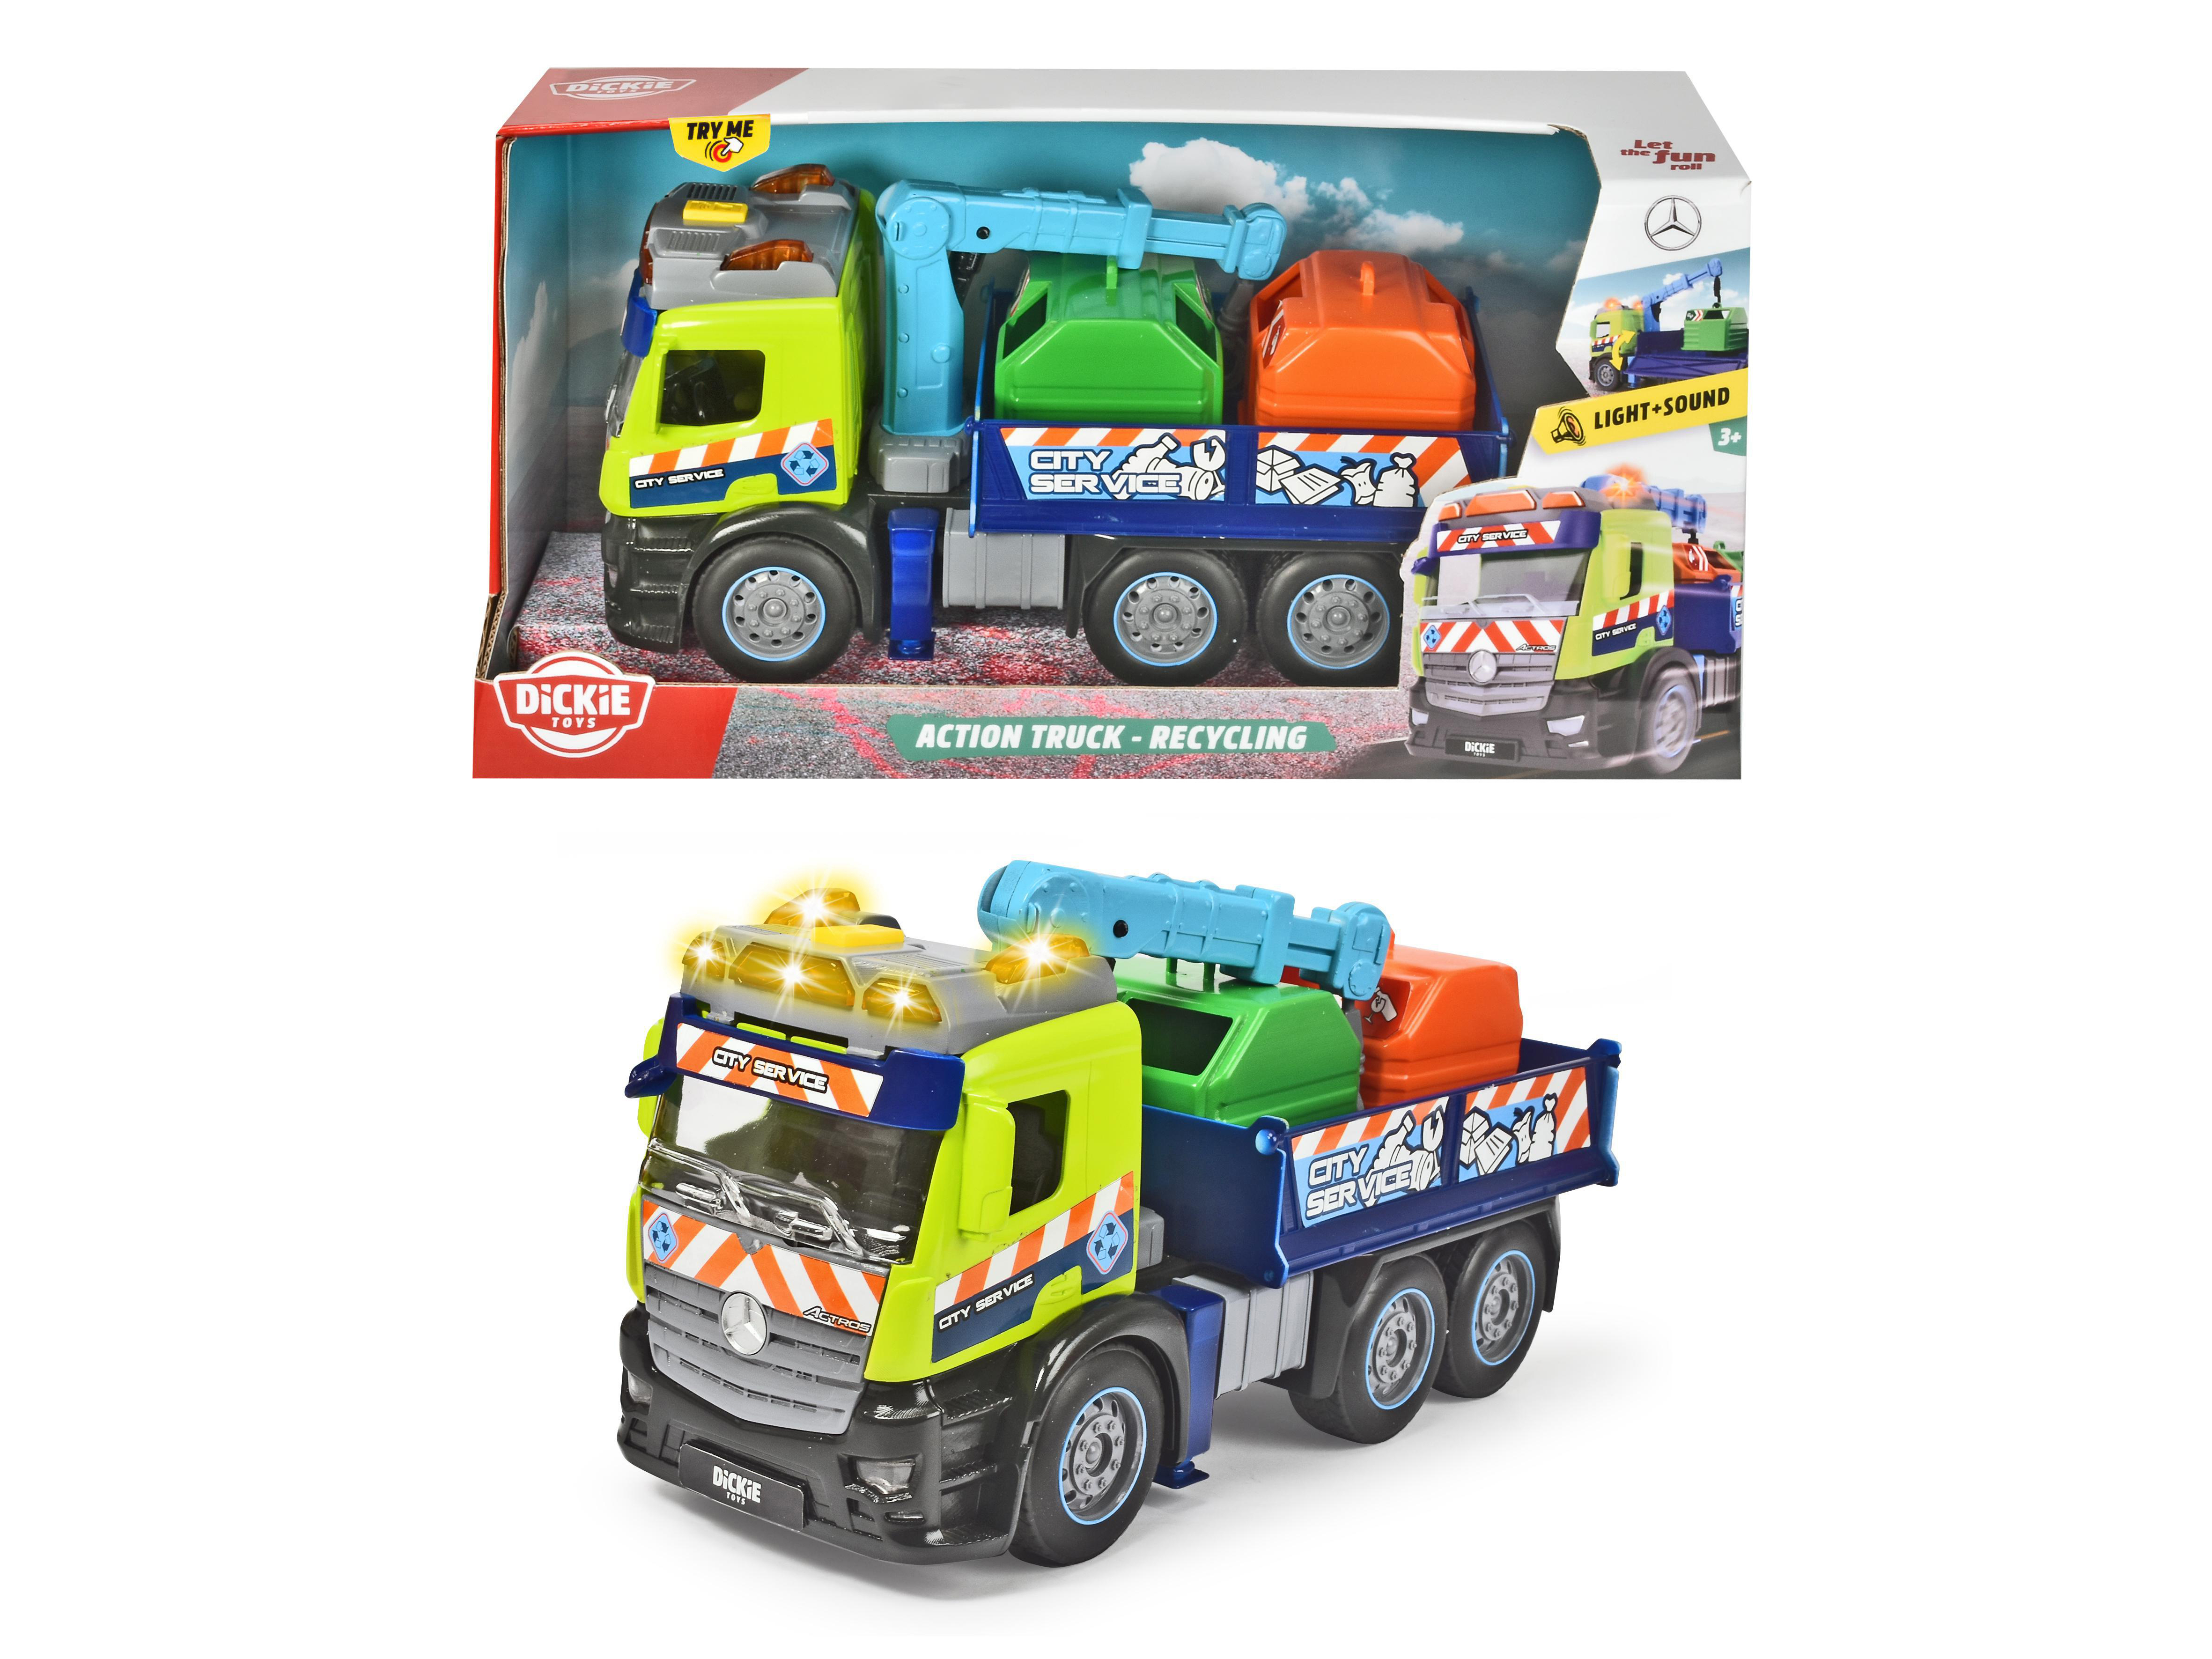 DICKIE-TOYS Mercedes Truck, inkl. Sound Licht Friktion, Container, Spielzeugauto Mehrfarbig & Recycling